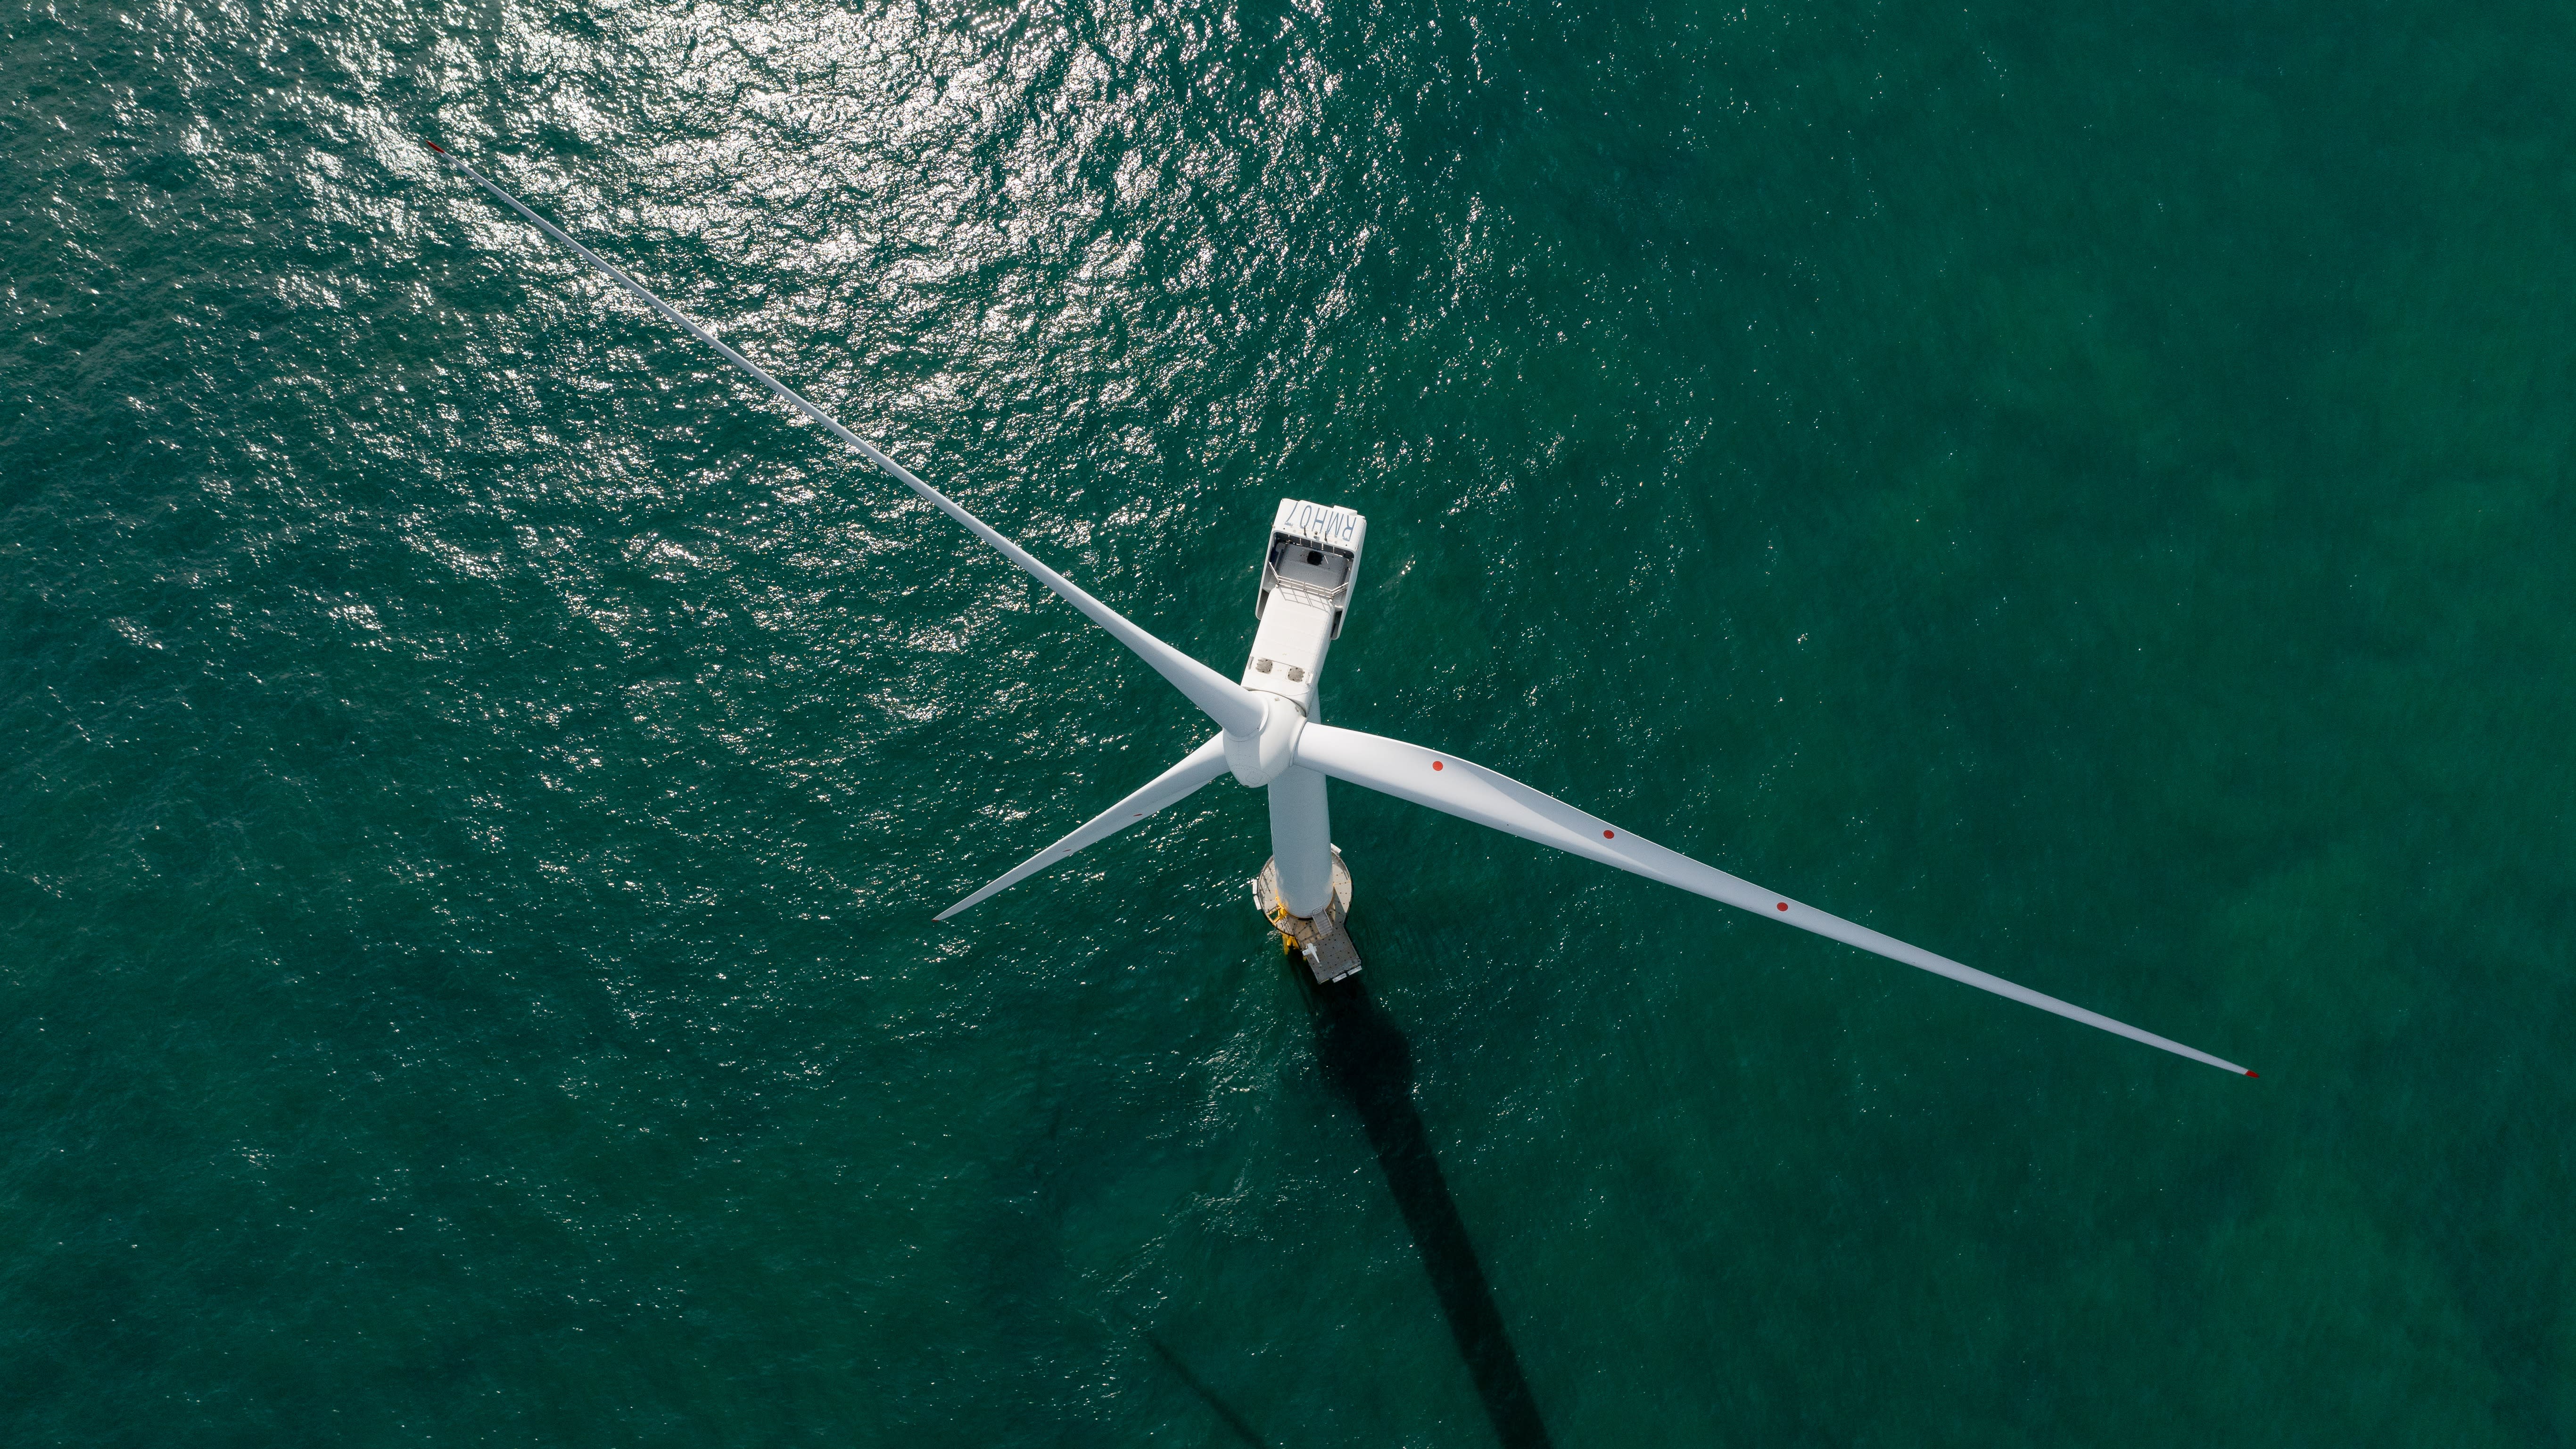 A wind turbine from above in the Rampion offshore wind farm. Photo: Ben Barden Photography